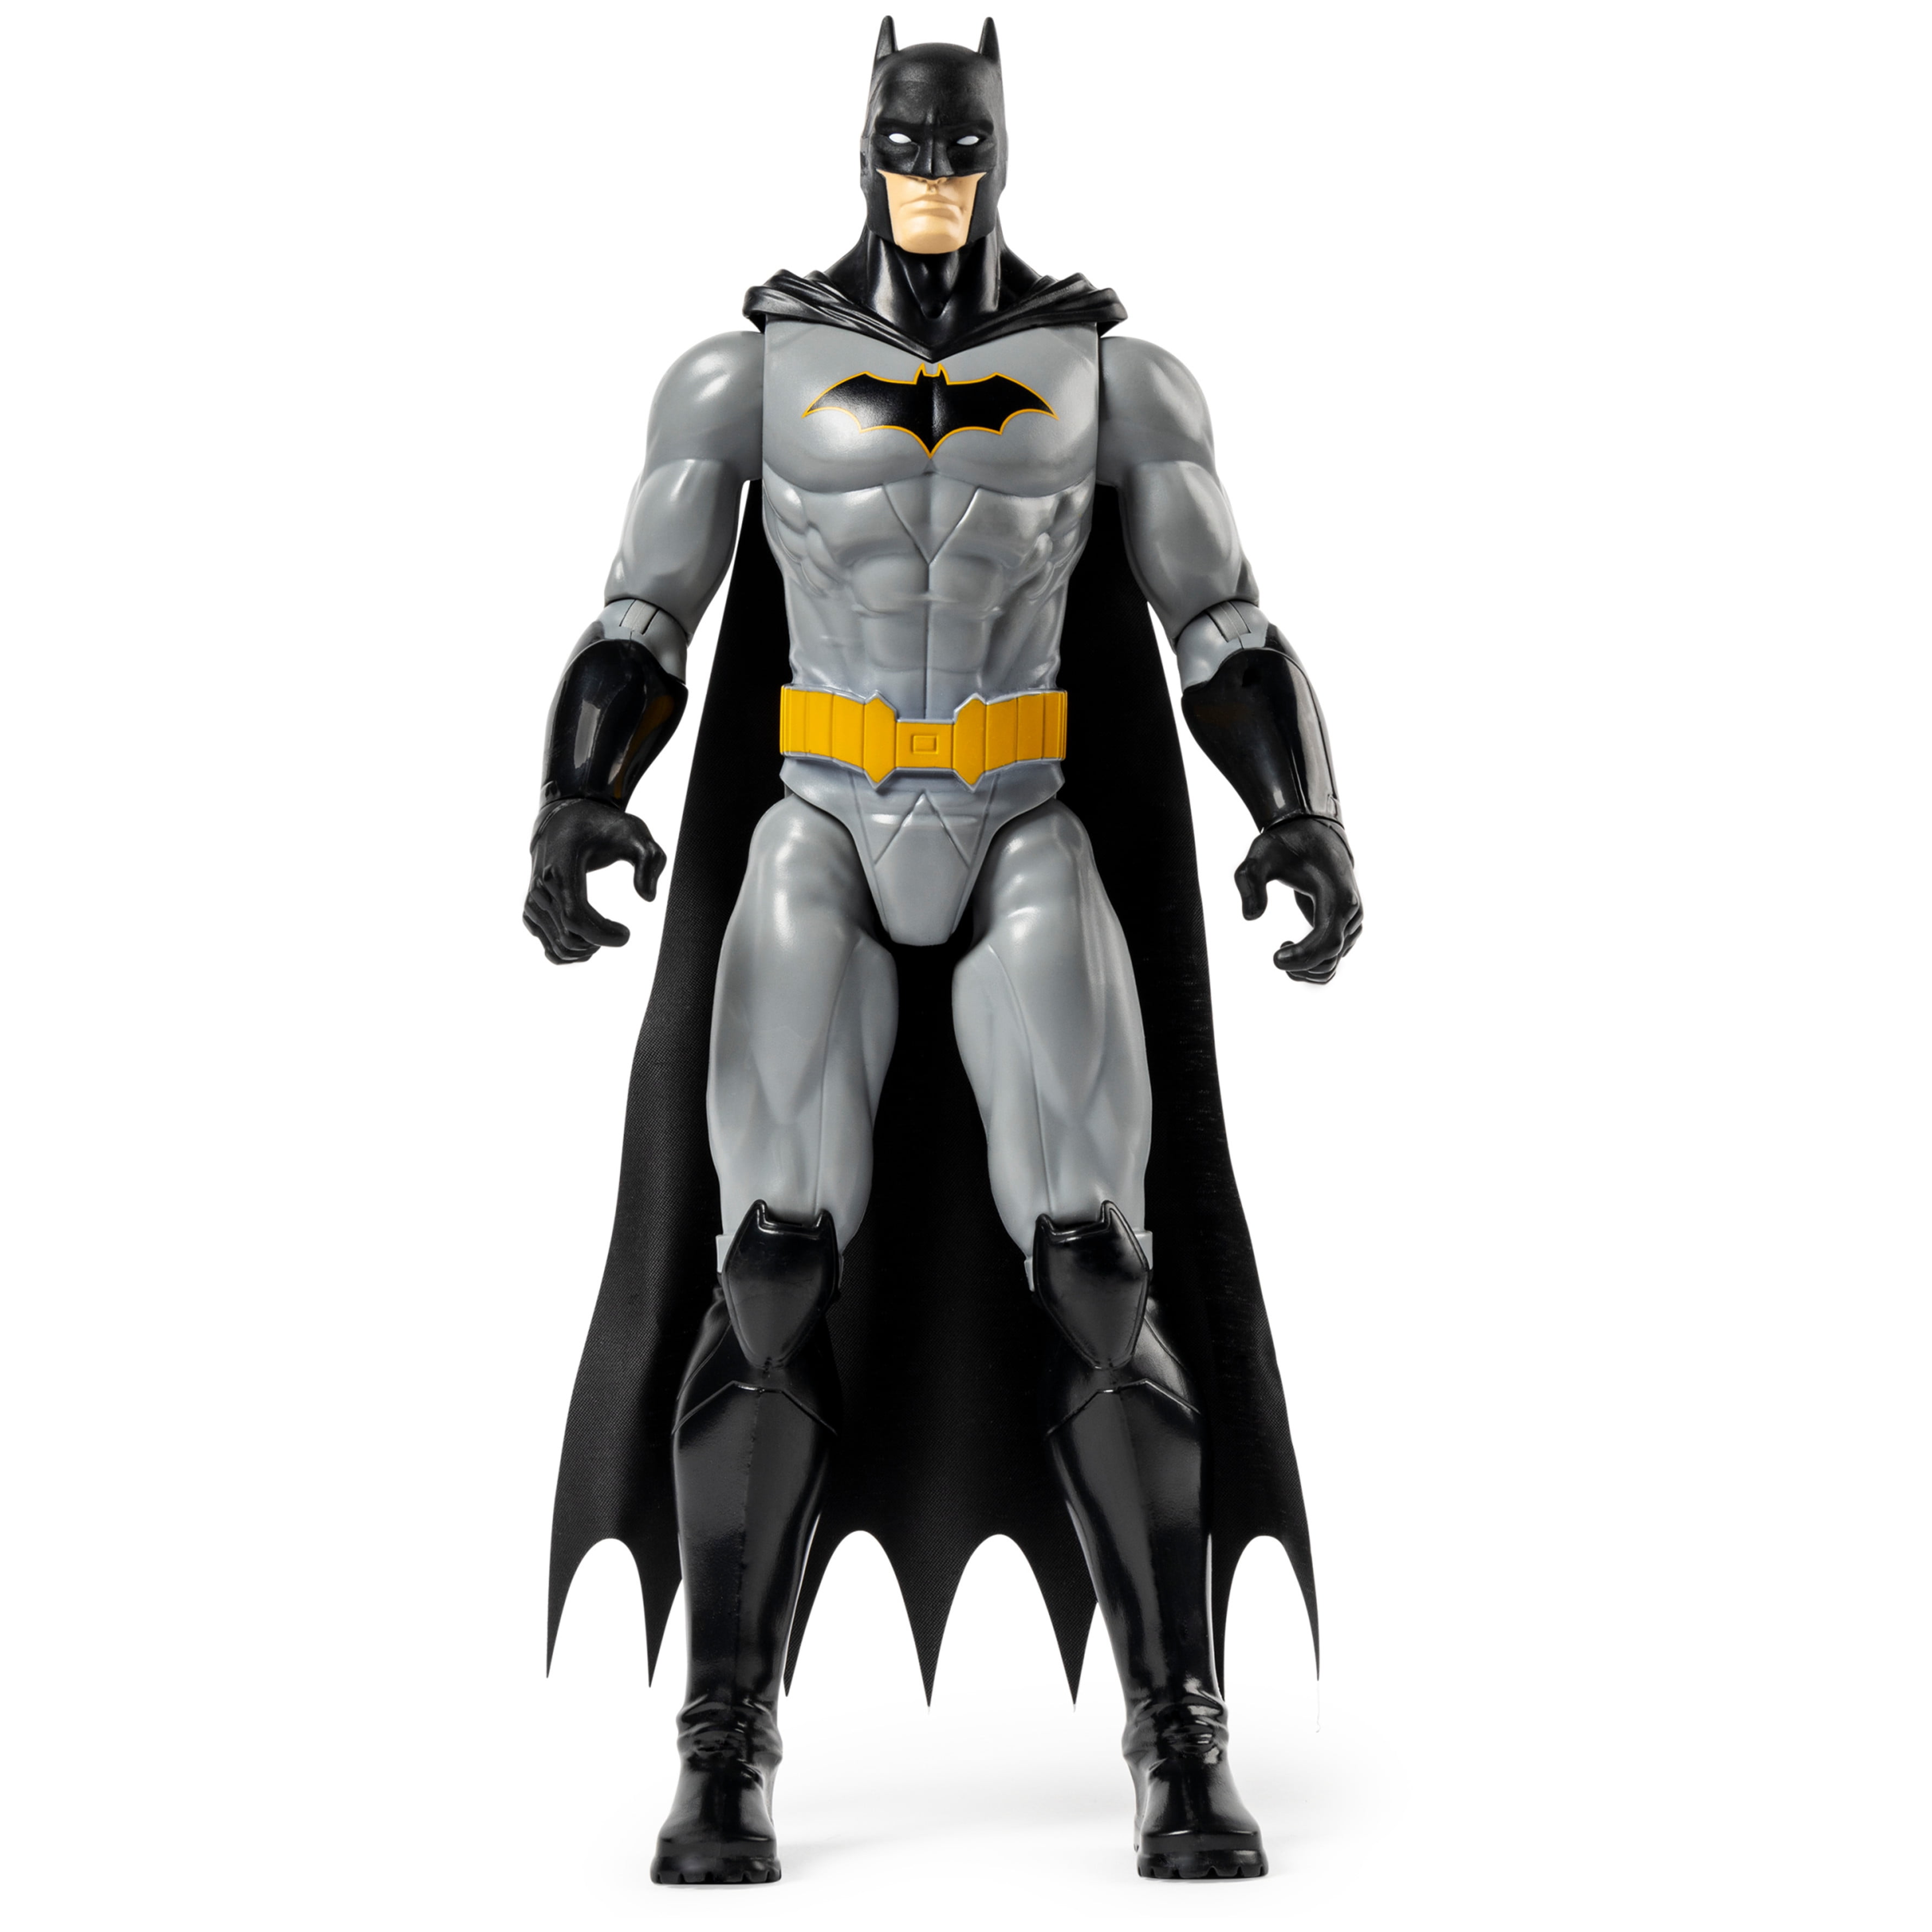 Batman 12-inch Rebirth Action Figure, Kids Toys for Boys Aged 3 and up -  